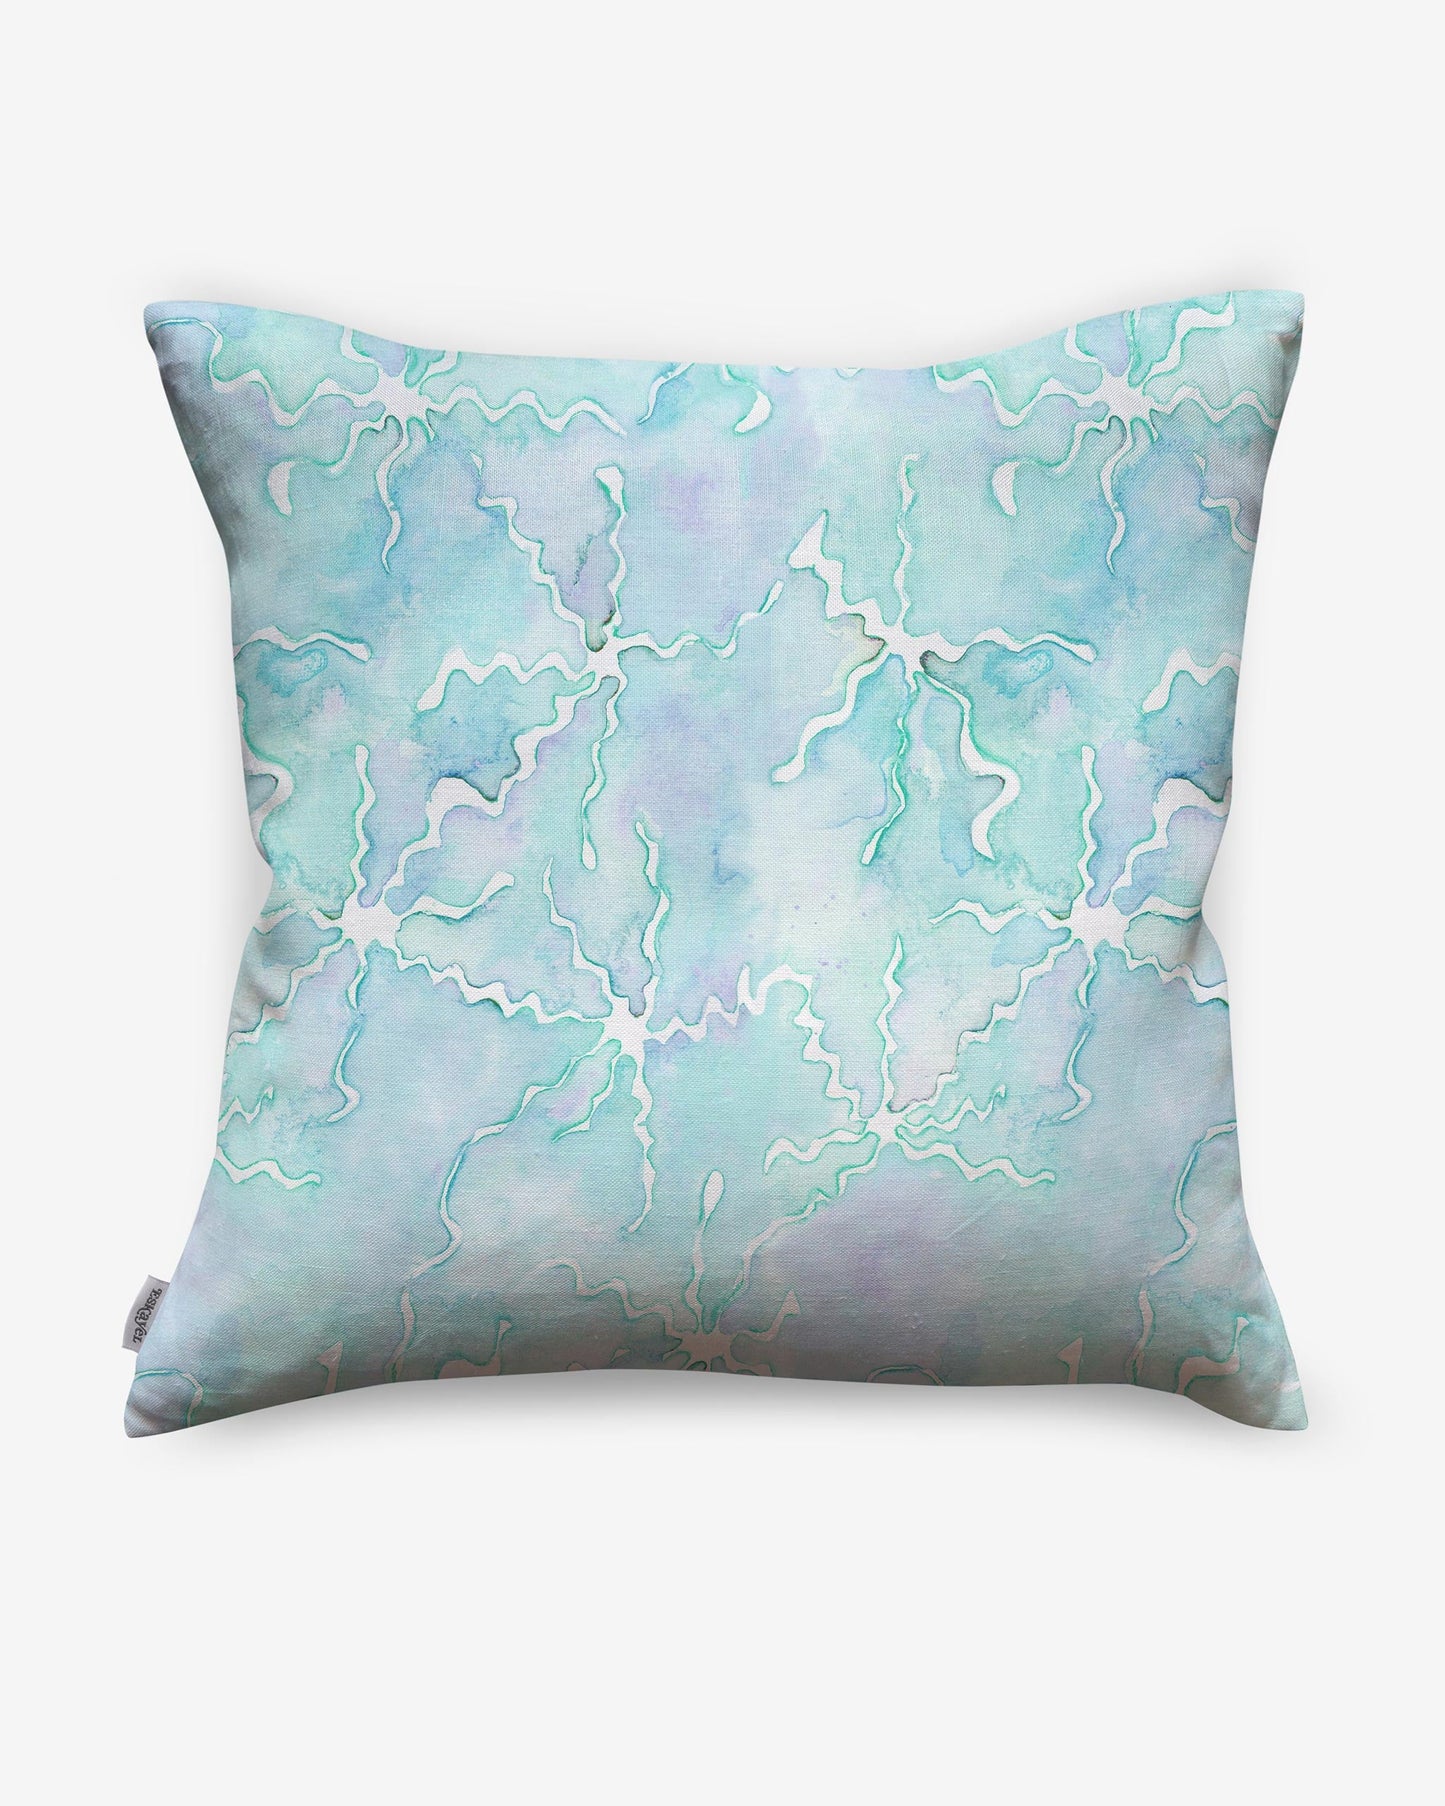 A high-end Pecosa Pillow design with a blue and white pattern, incorporating sun motifs and resist dye techniques